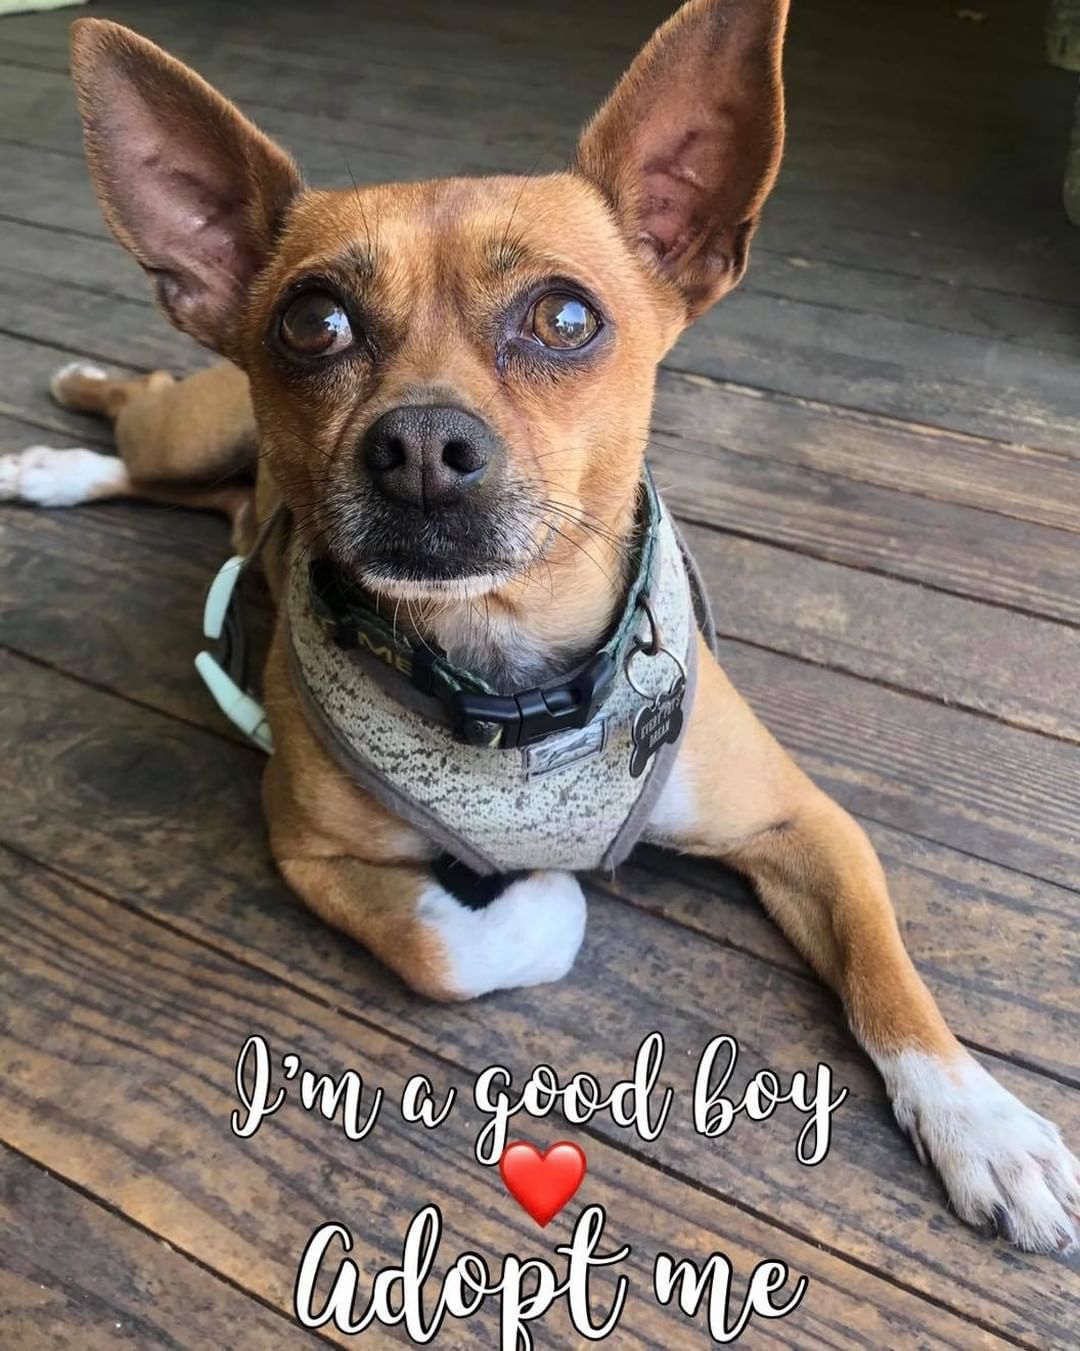 <a target='_blank' href='https://www.instagram.com/explore/tags/AdoptMe/'>#AdoptMe</a>. Max is a happy, loving little dog!! He might just be the handsome boy you have been looking for!  To adopt Max or any of our dogs please complete our adoption application. everypetsdream.org/adopt <a target='_blank' href='https://www.instagram.com/explore/tags/epdMax/'>#epdMax</a> <a target='_blank' href='https://www.instagram.com/explore/tags/everypetsdream/'>#everypetsdream</a>